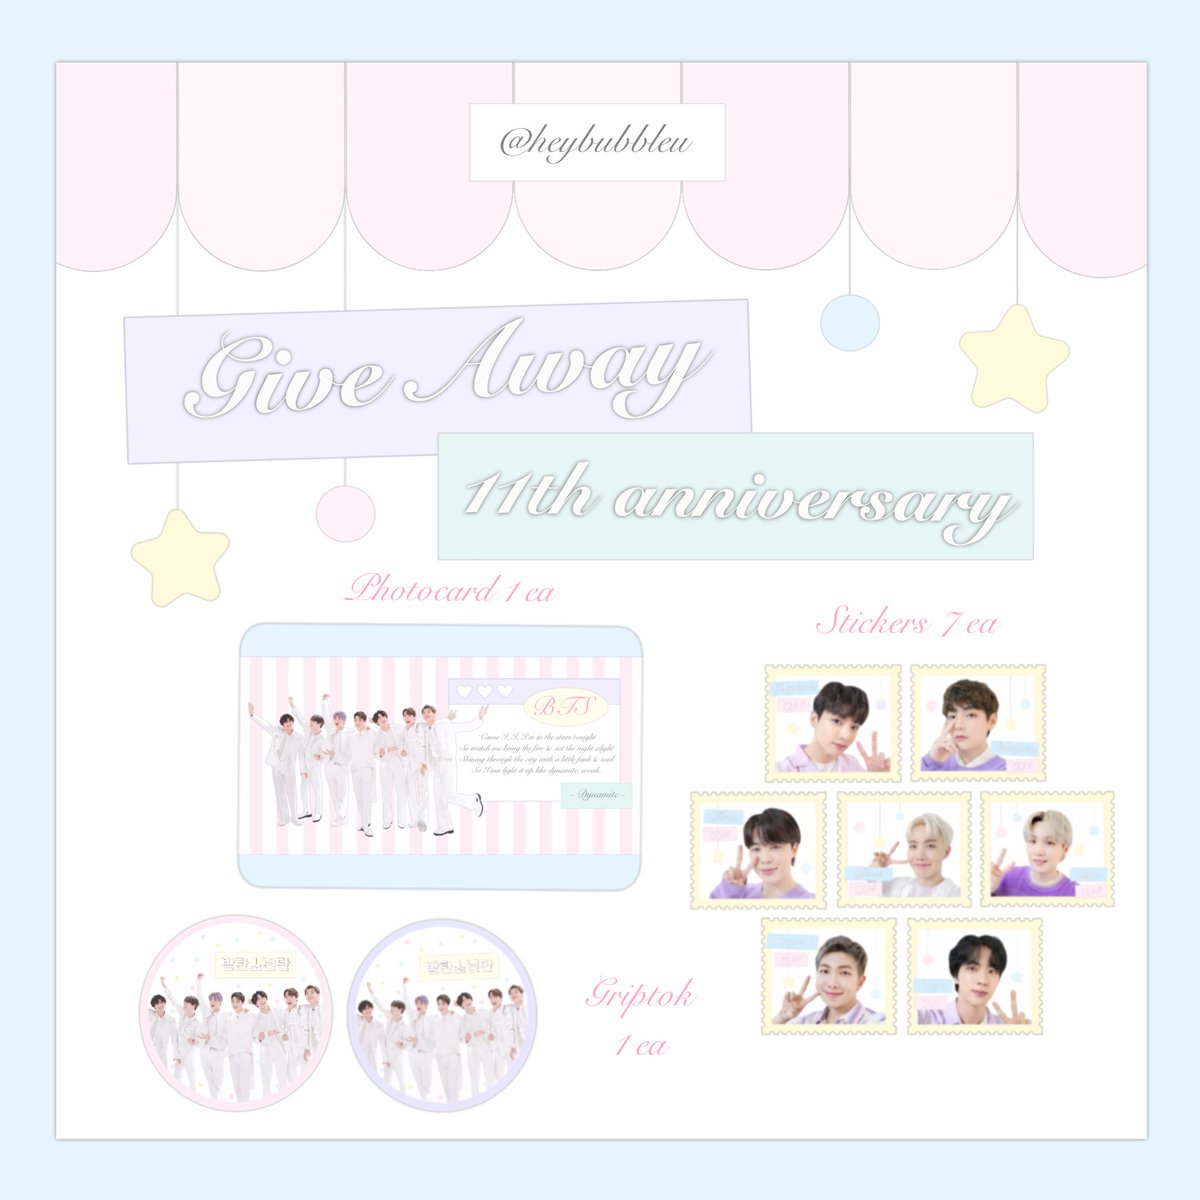 pls kindly rt 🥤 𝒢iveaway 11th 𝒜nniversary ♡ cafe #youngforever_withbts location : Union mall date : 8 June ( round 4 ) ♡ gg form 5 set date : 15/05 ( 20.00 ) shipping : 40 bath 👀 more details in mention 𓂂 𓂂 #BTS11thAnniversary #11YearsWithBTS #BTS